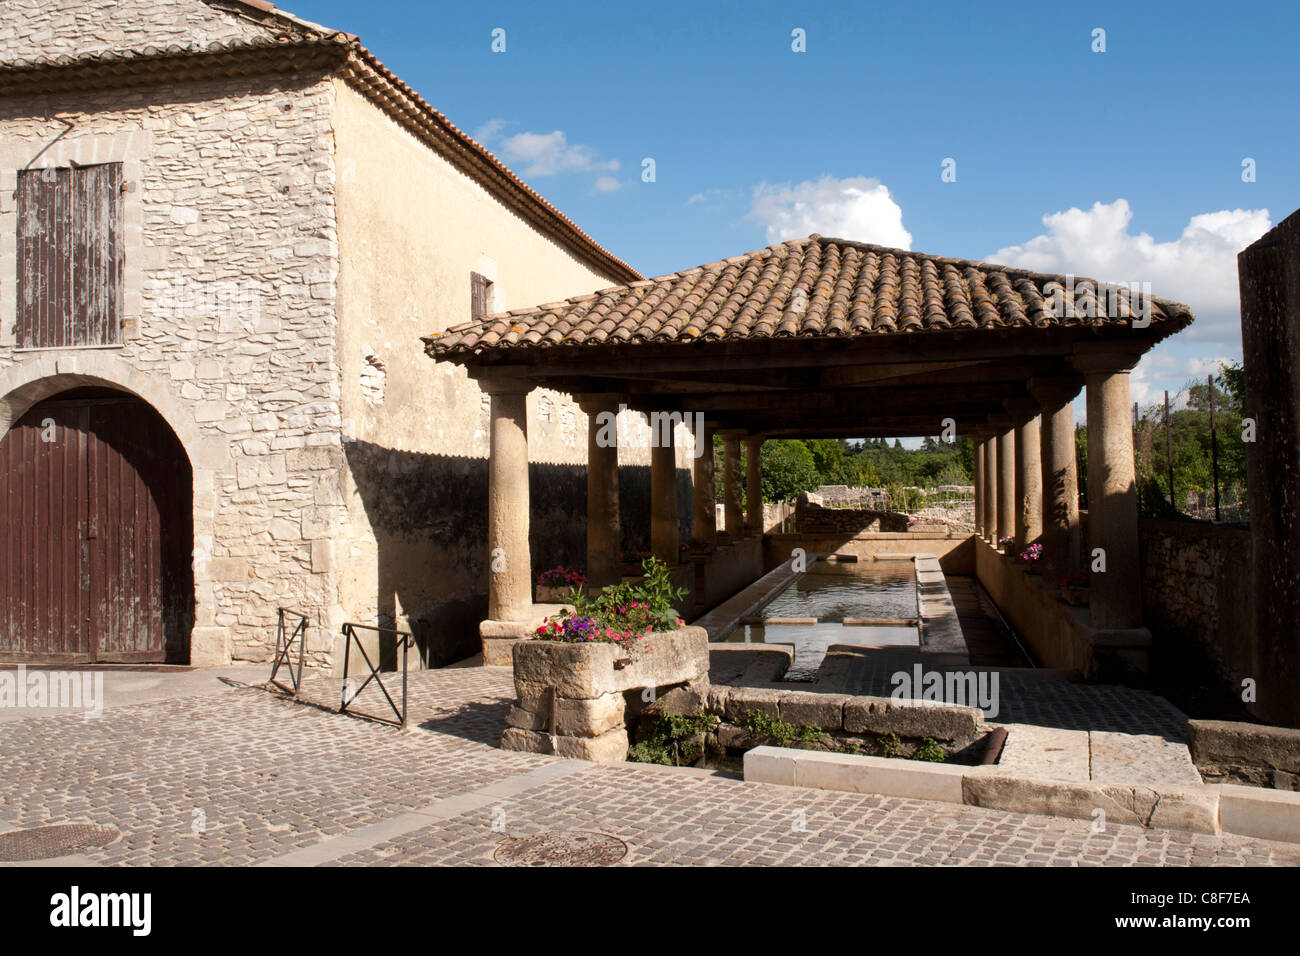 France, Gard, Languedoc-Roussillion, Tavel, washing house, pump room, architecture, flowers, buildings, constructions, columns, Stock Photo